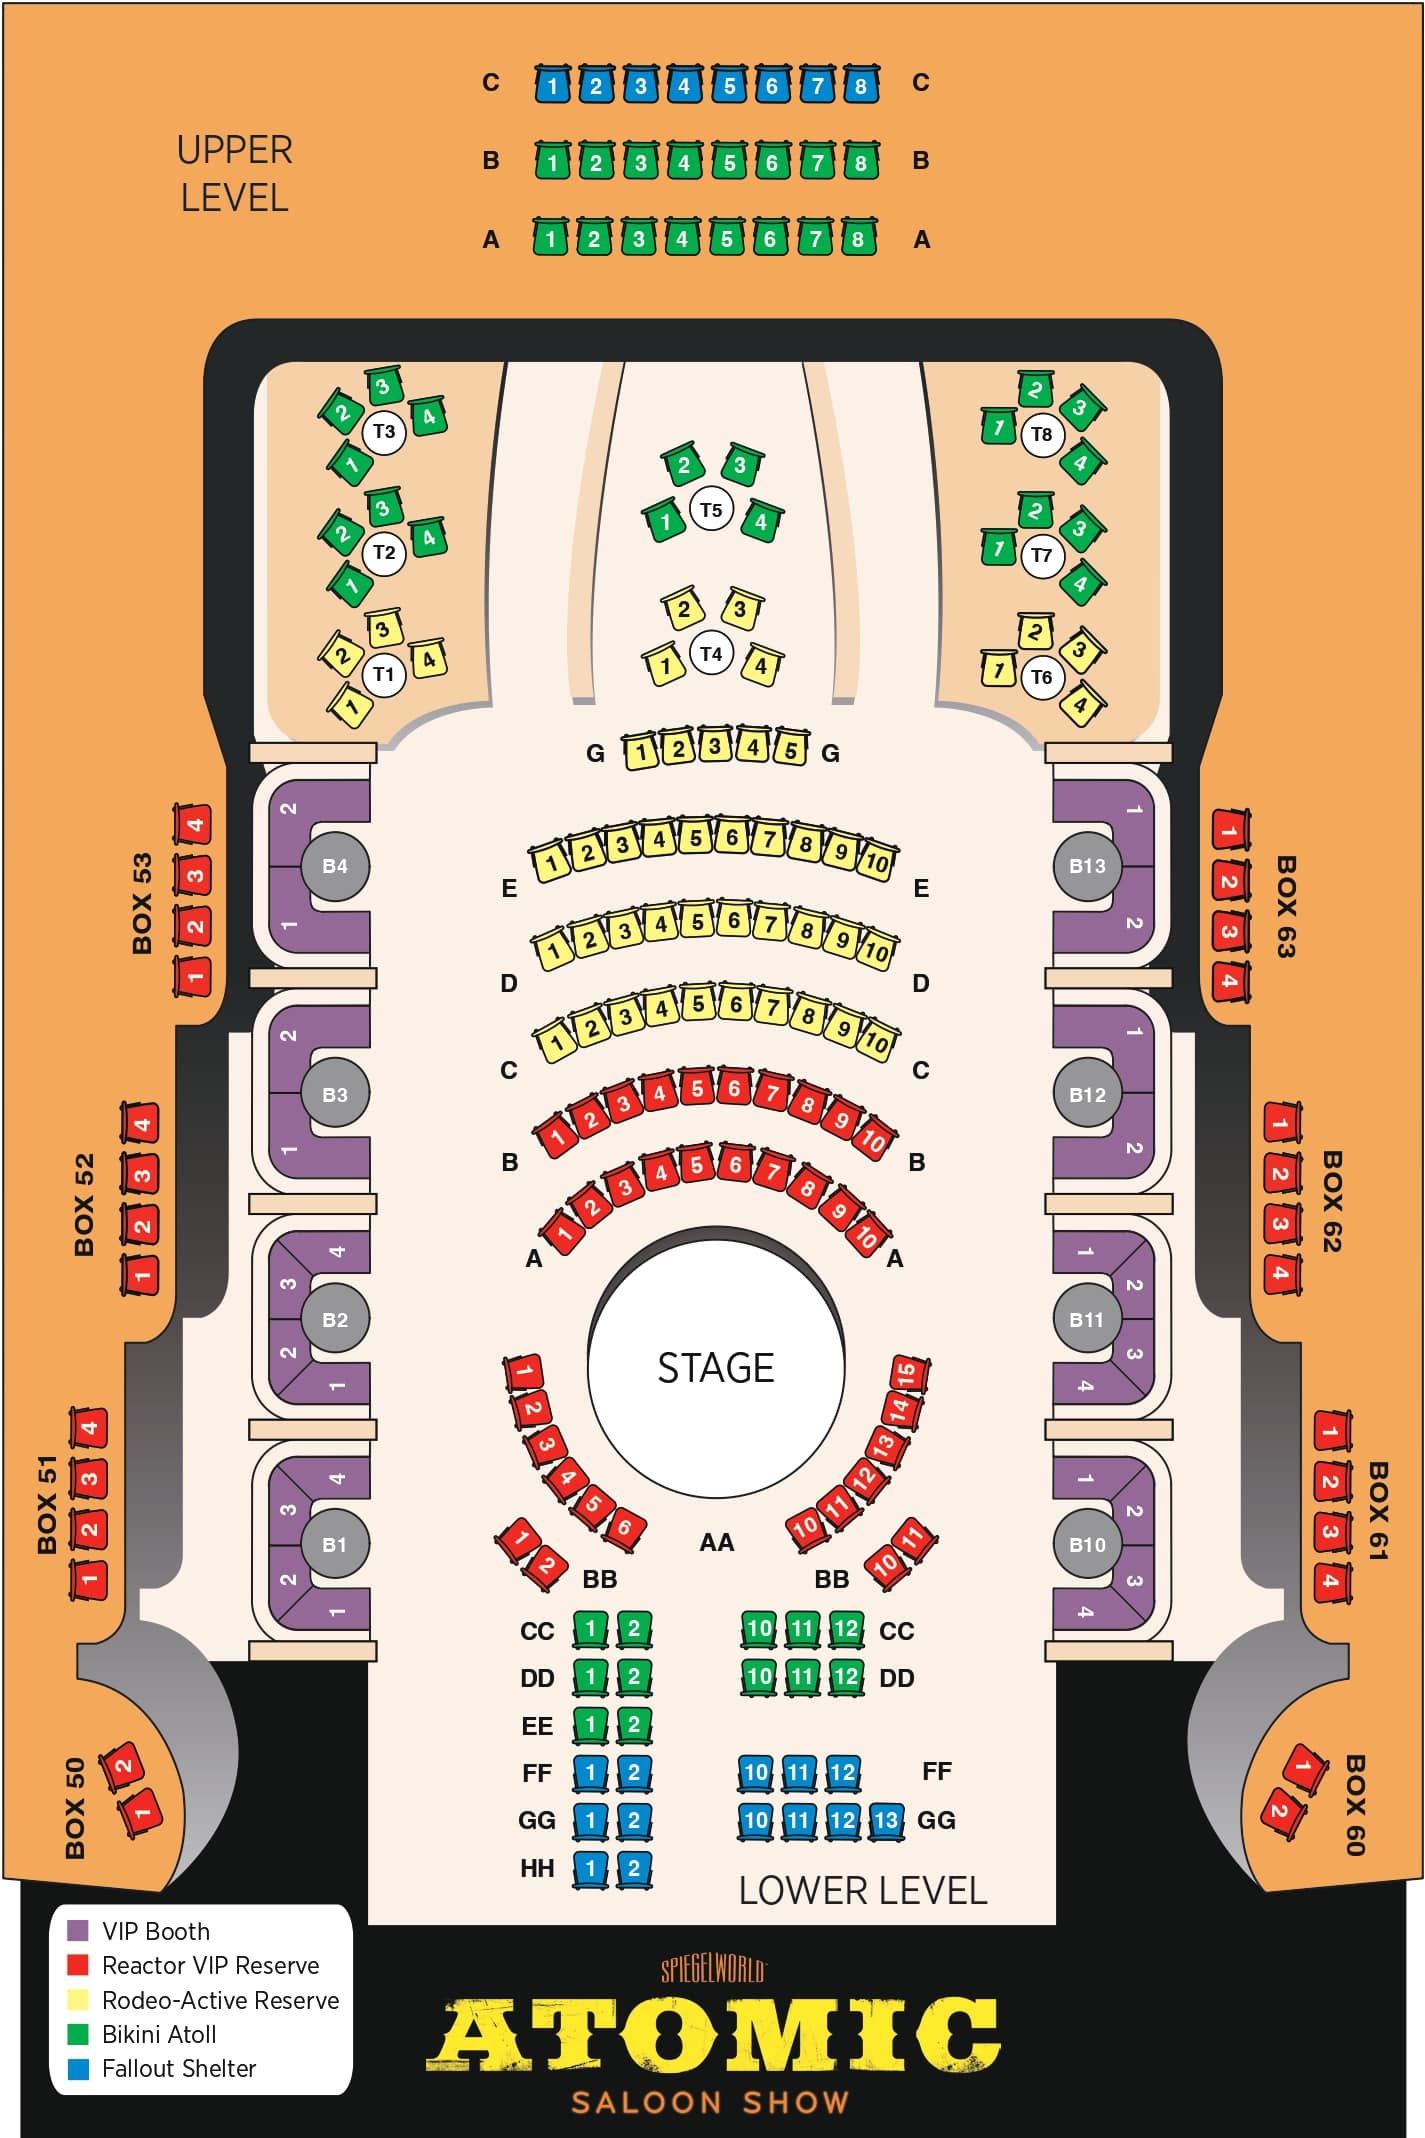 This image displays a colorful seating chart for the Atomic Saloon Show. The stage is in the center, surrounded by seats labeled A-HH in various colors indicating different sections. There are labelled boxes on both sides of the theater and a key at the bottom identifies VIP Booths, Reactor VIP Reserve, Rodeo-Active Reserve, Bikini Atoll, and Fallout Shelter areas. Upper and lower levels are indicated.